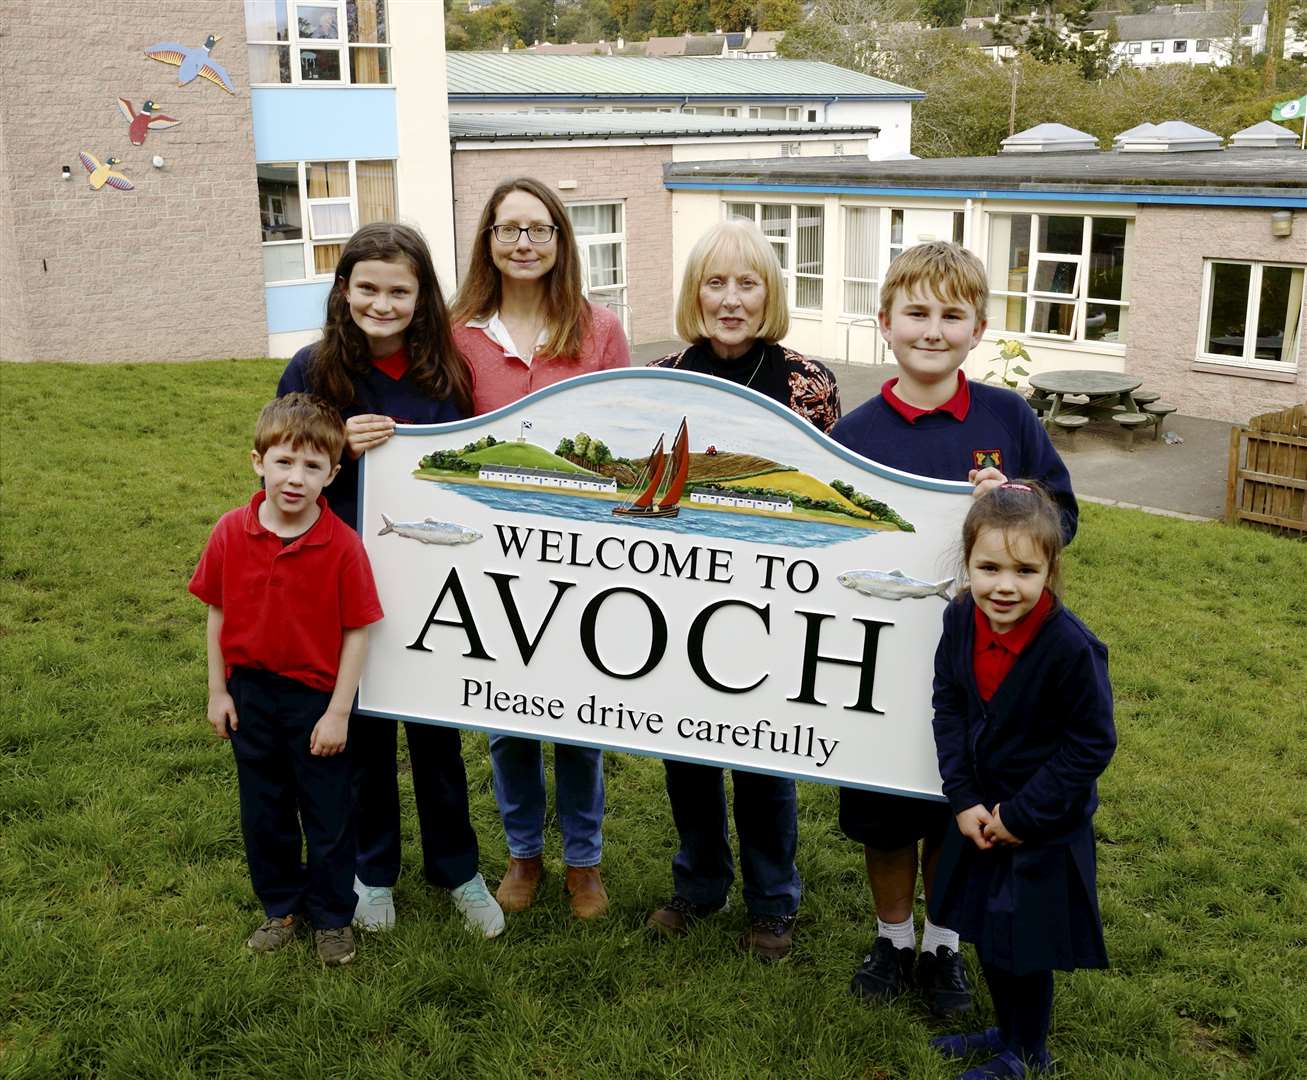 New Welcome to Avoch sign..Sarah Dunton, chair of Avoch Community Council and Mary Smyth, Secretary of Avoch Community Council with P1 and P7 children from Avoch Primary School holding up the new welcome to Avoch sign..Picture: James MacKenzie..